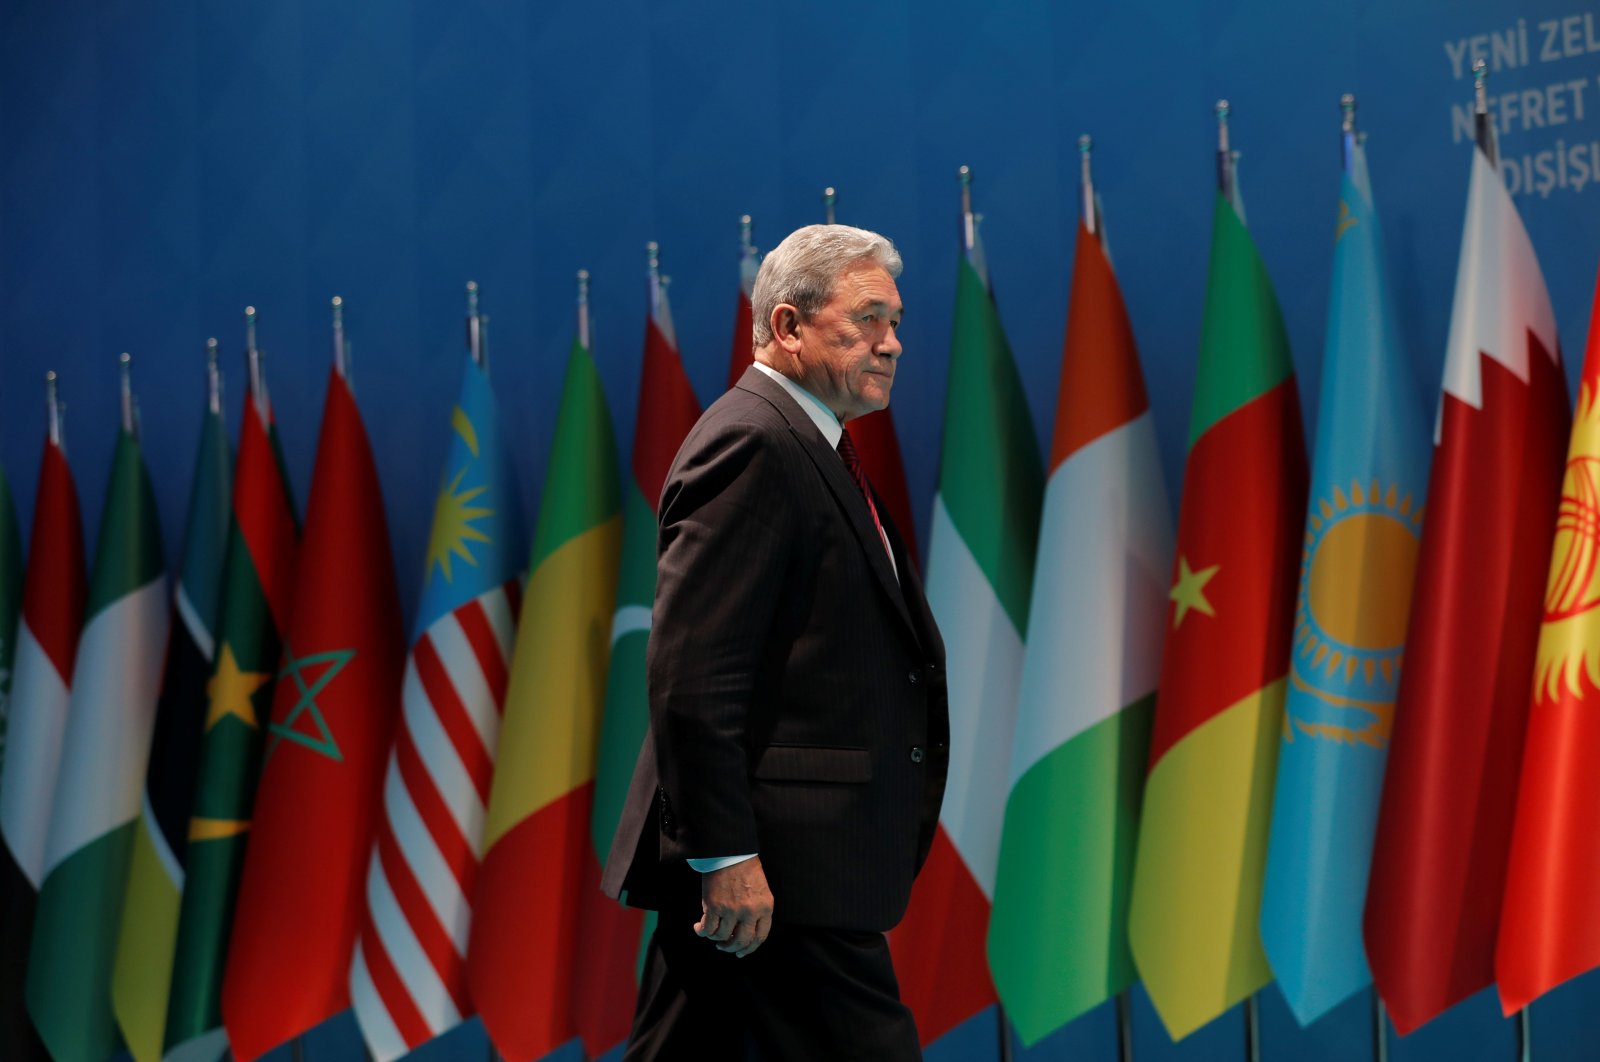 New Zealand's Foreign Minister Winston Peters arrives at a news conference after he attended an emergency meeting of the Organisation of Islamic Cooperation (OIC) in Istanbul, Turkey, March 22, 2019. (Reuters Photo)